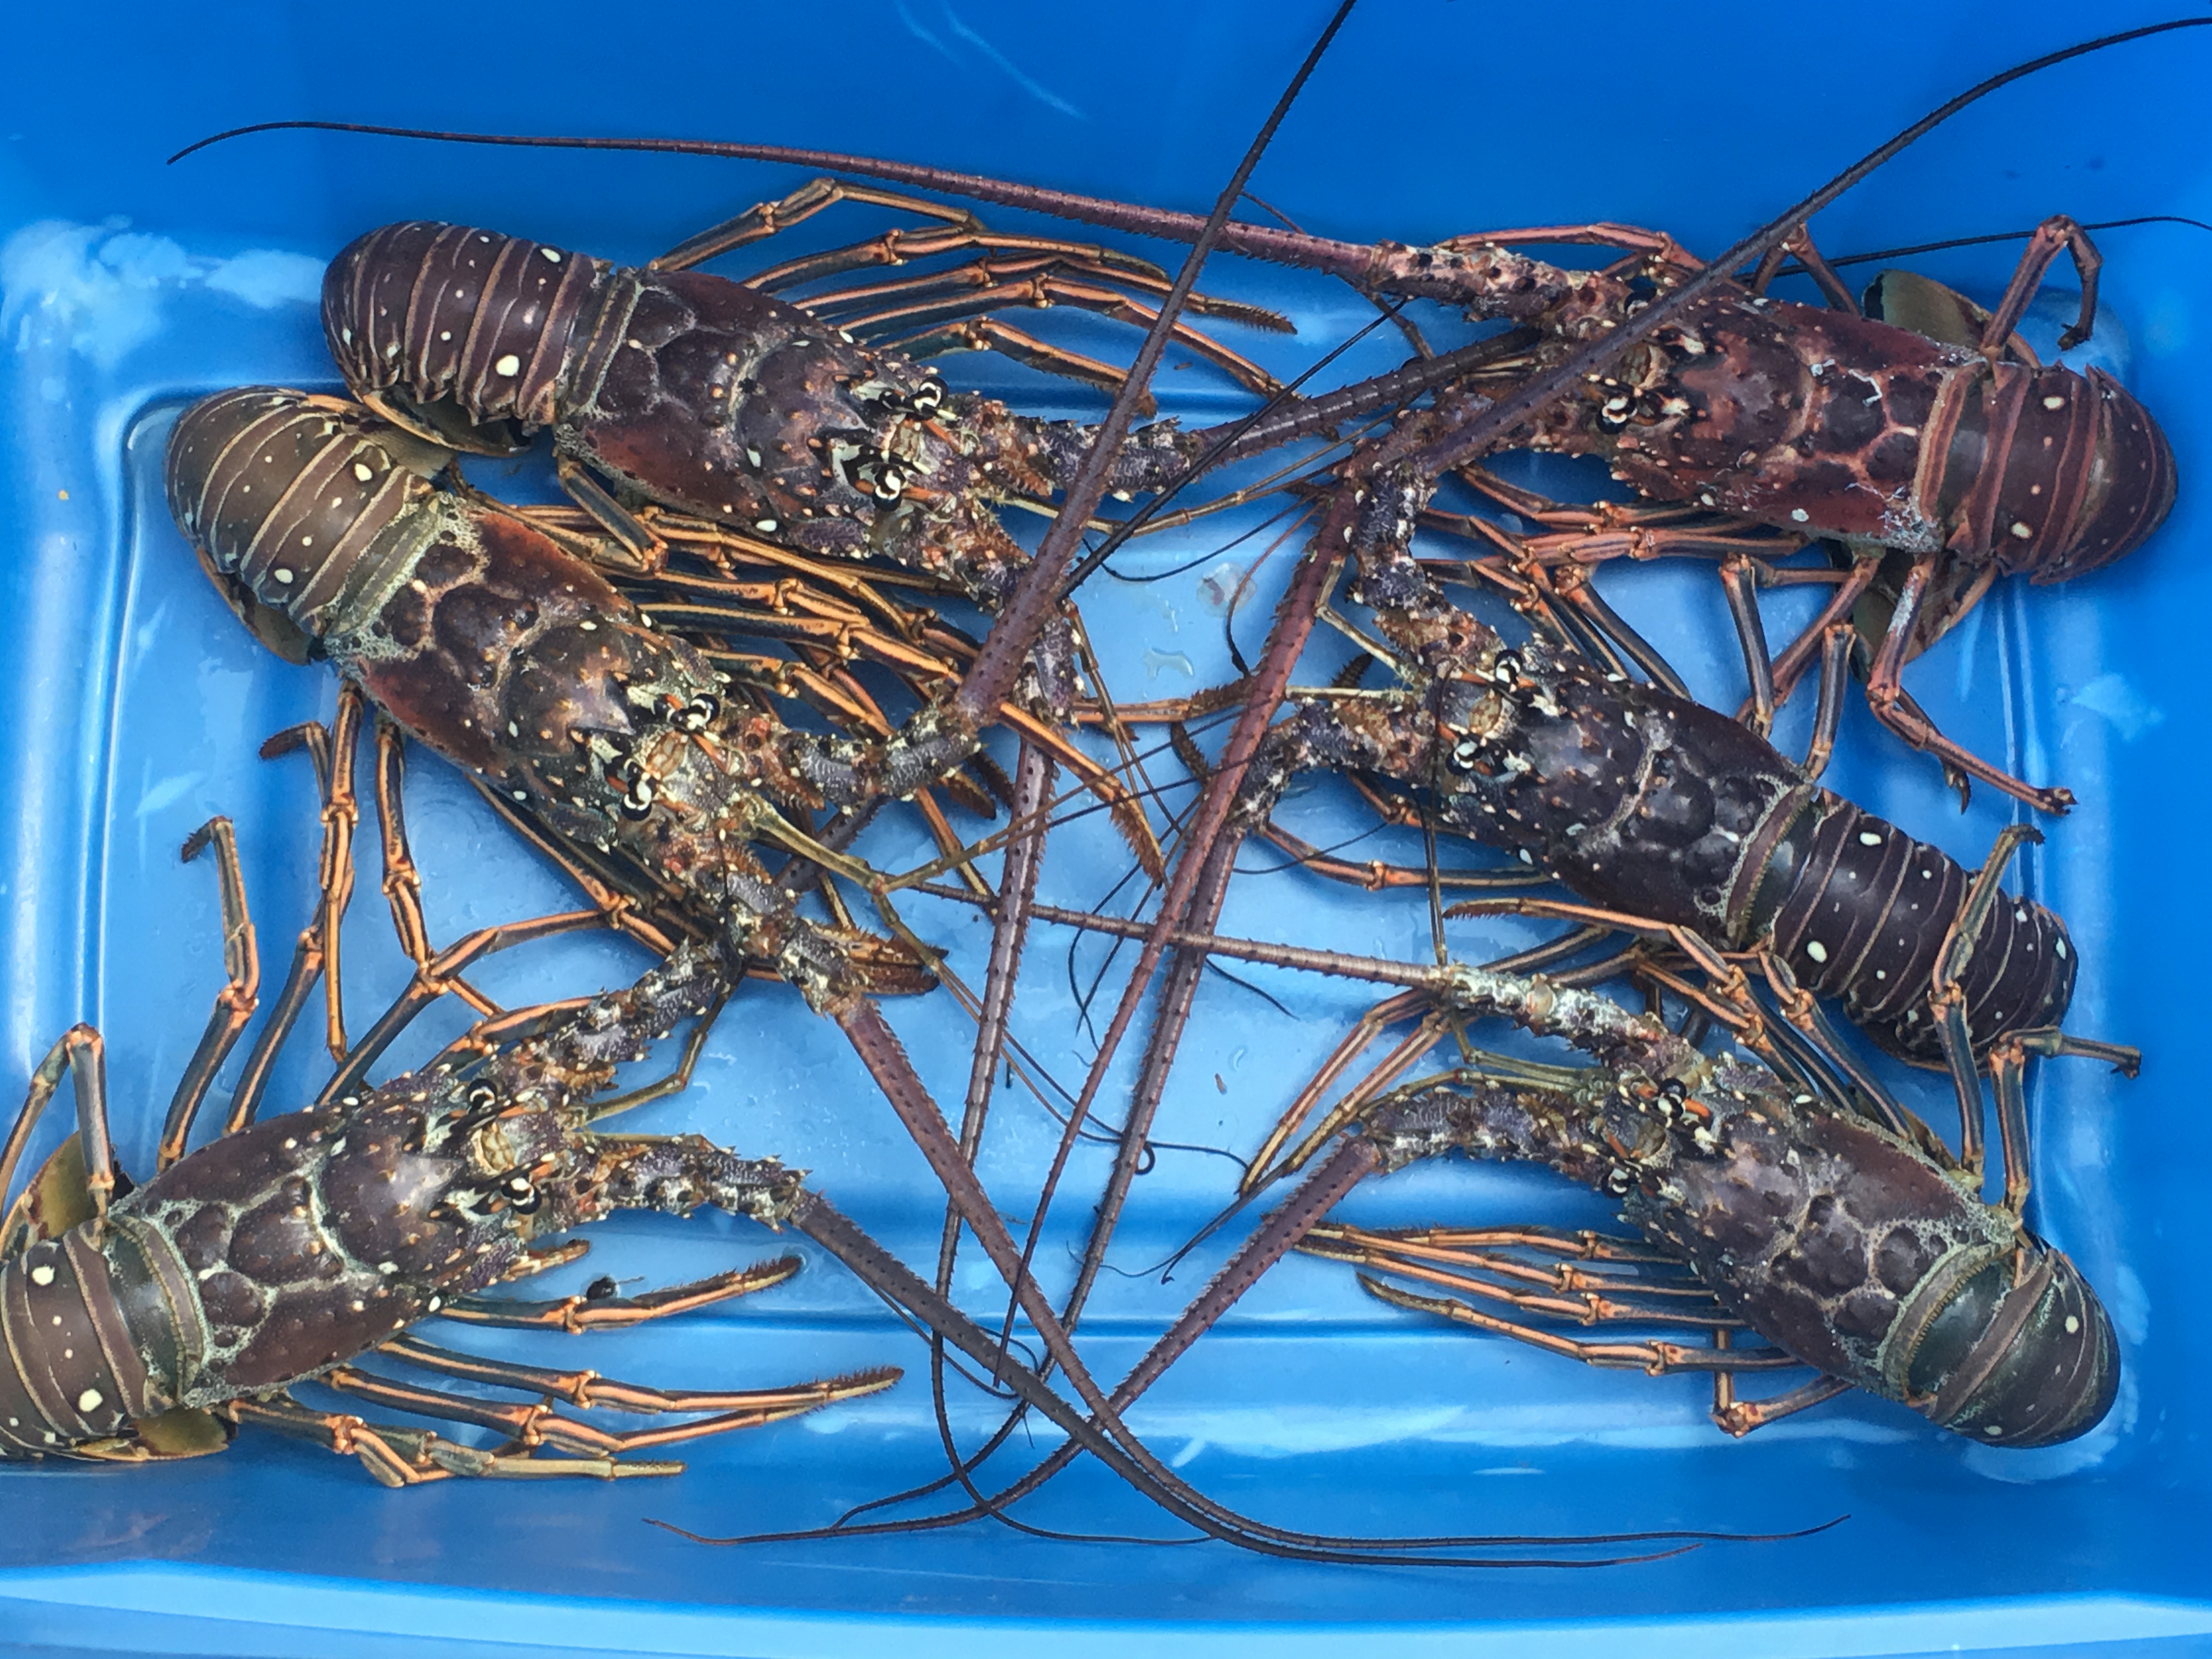 New Group Is Dedicated to Liberating Lobsters 